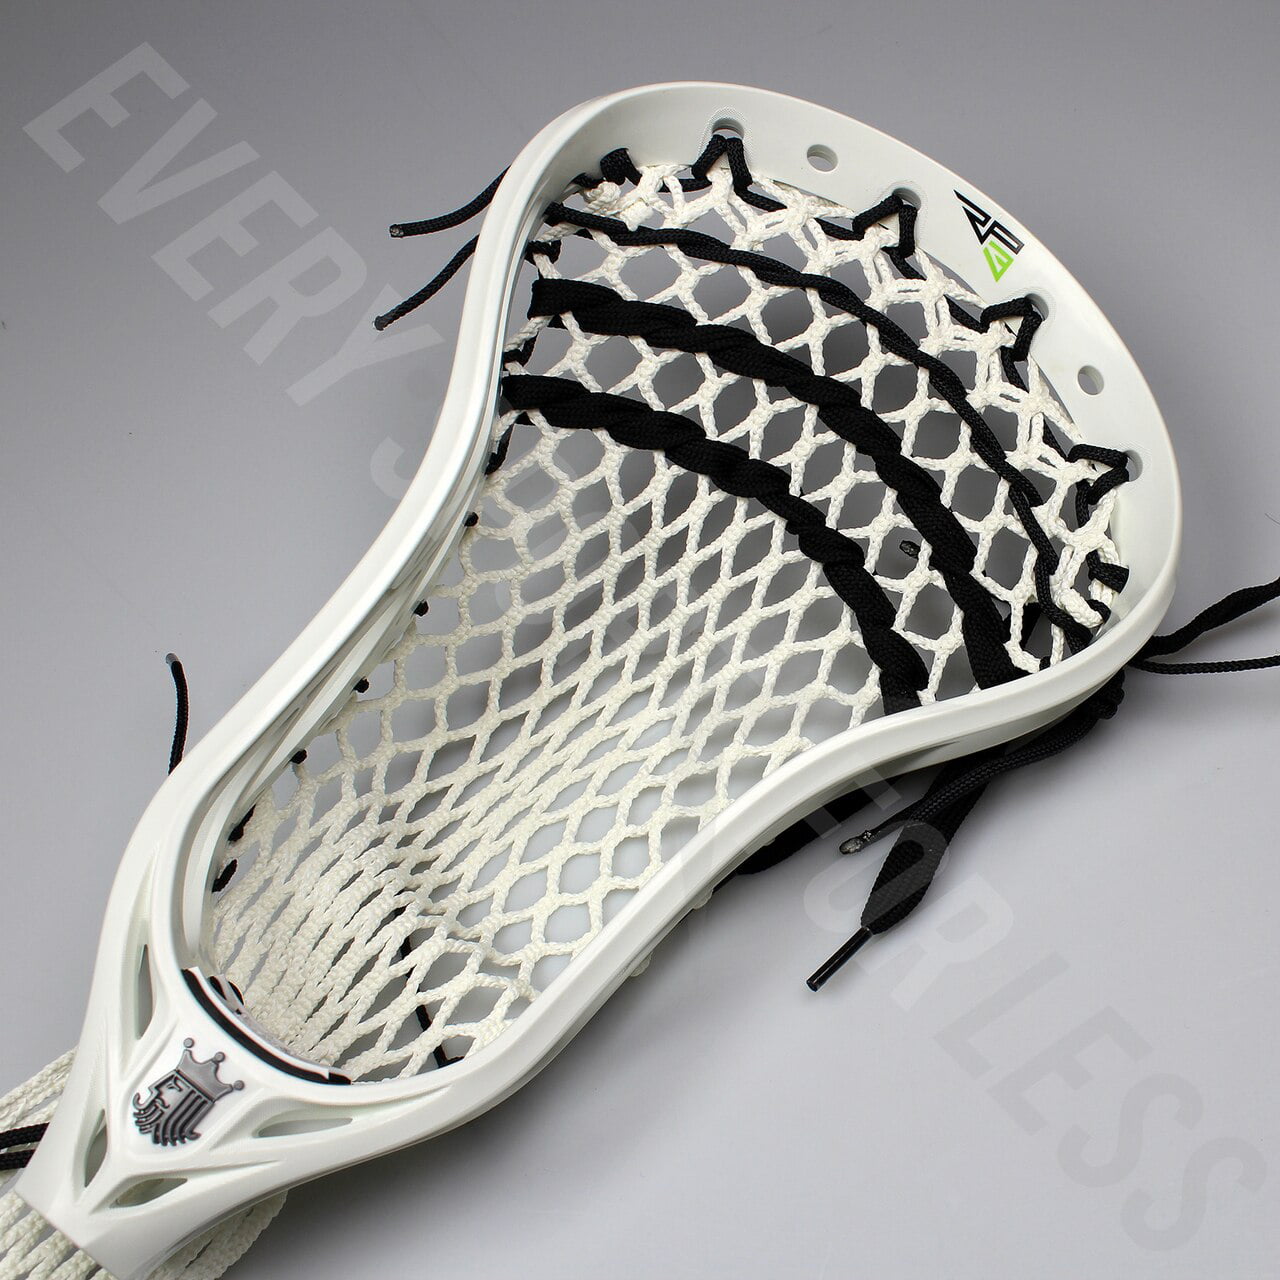 NEW Brine RP3 Rob Pannell Unstrung LAX X Spec Lacrosse Head Red List @ $95 